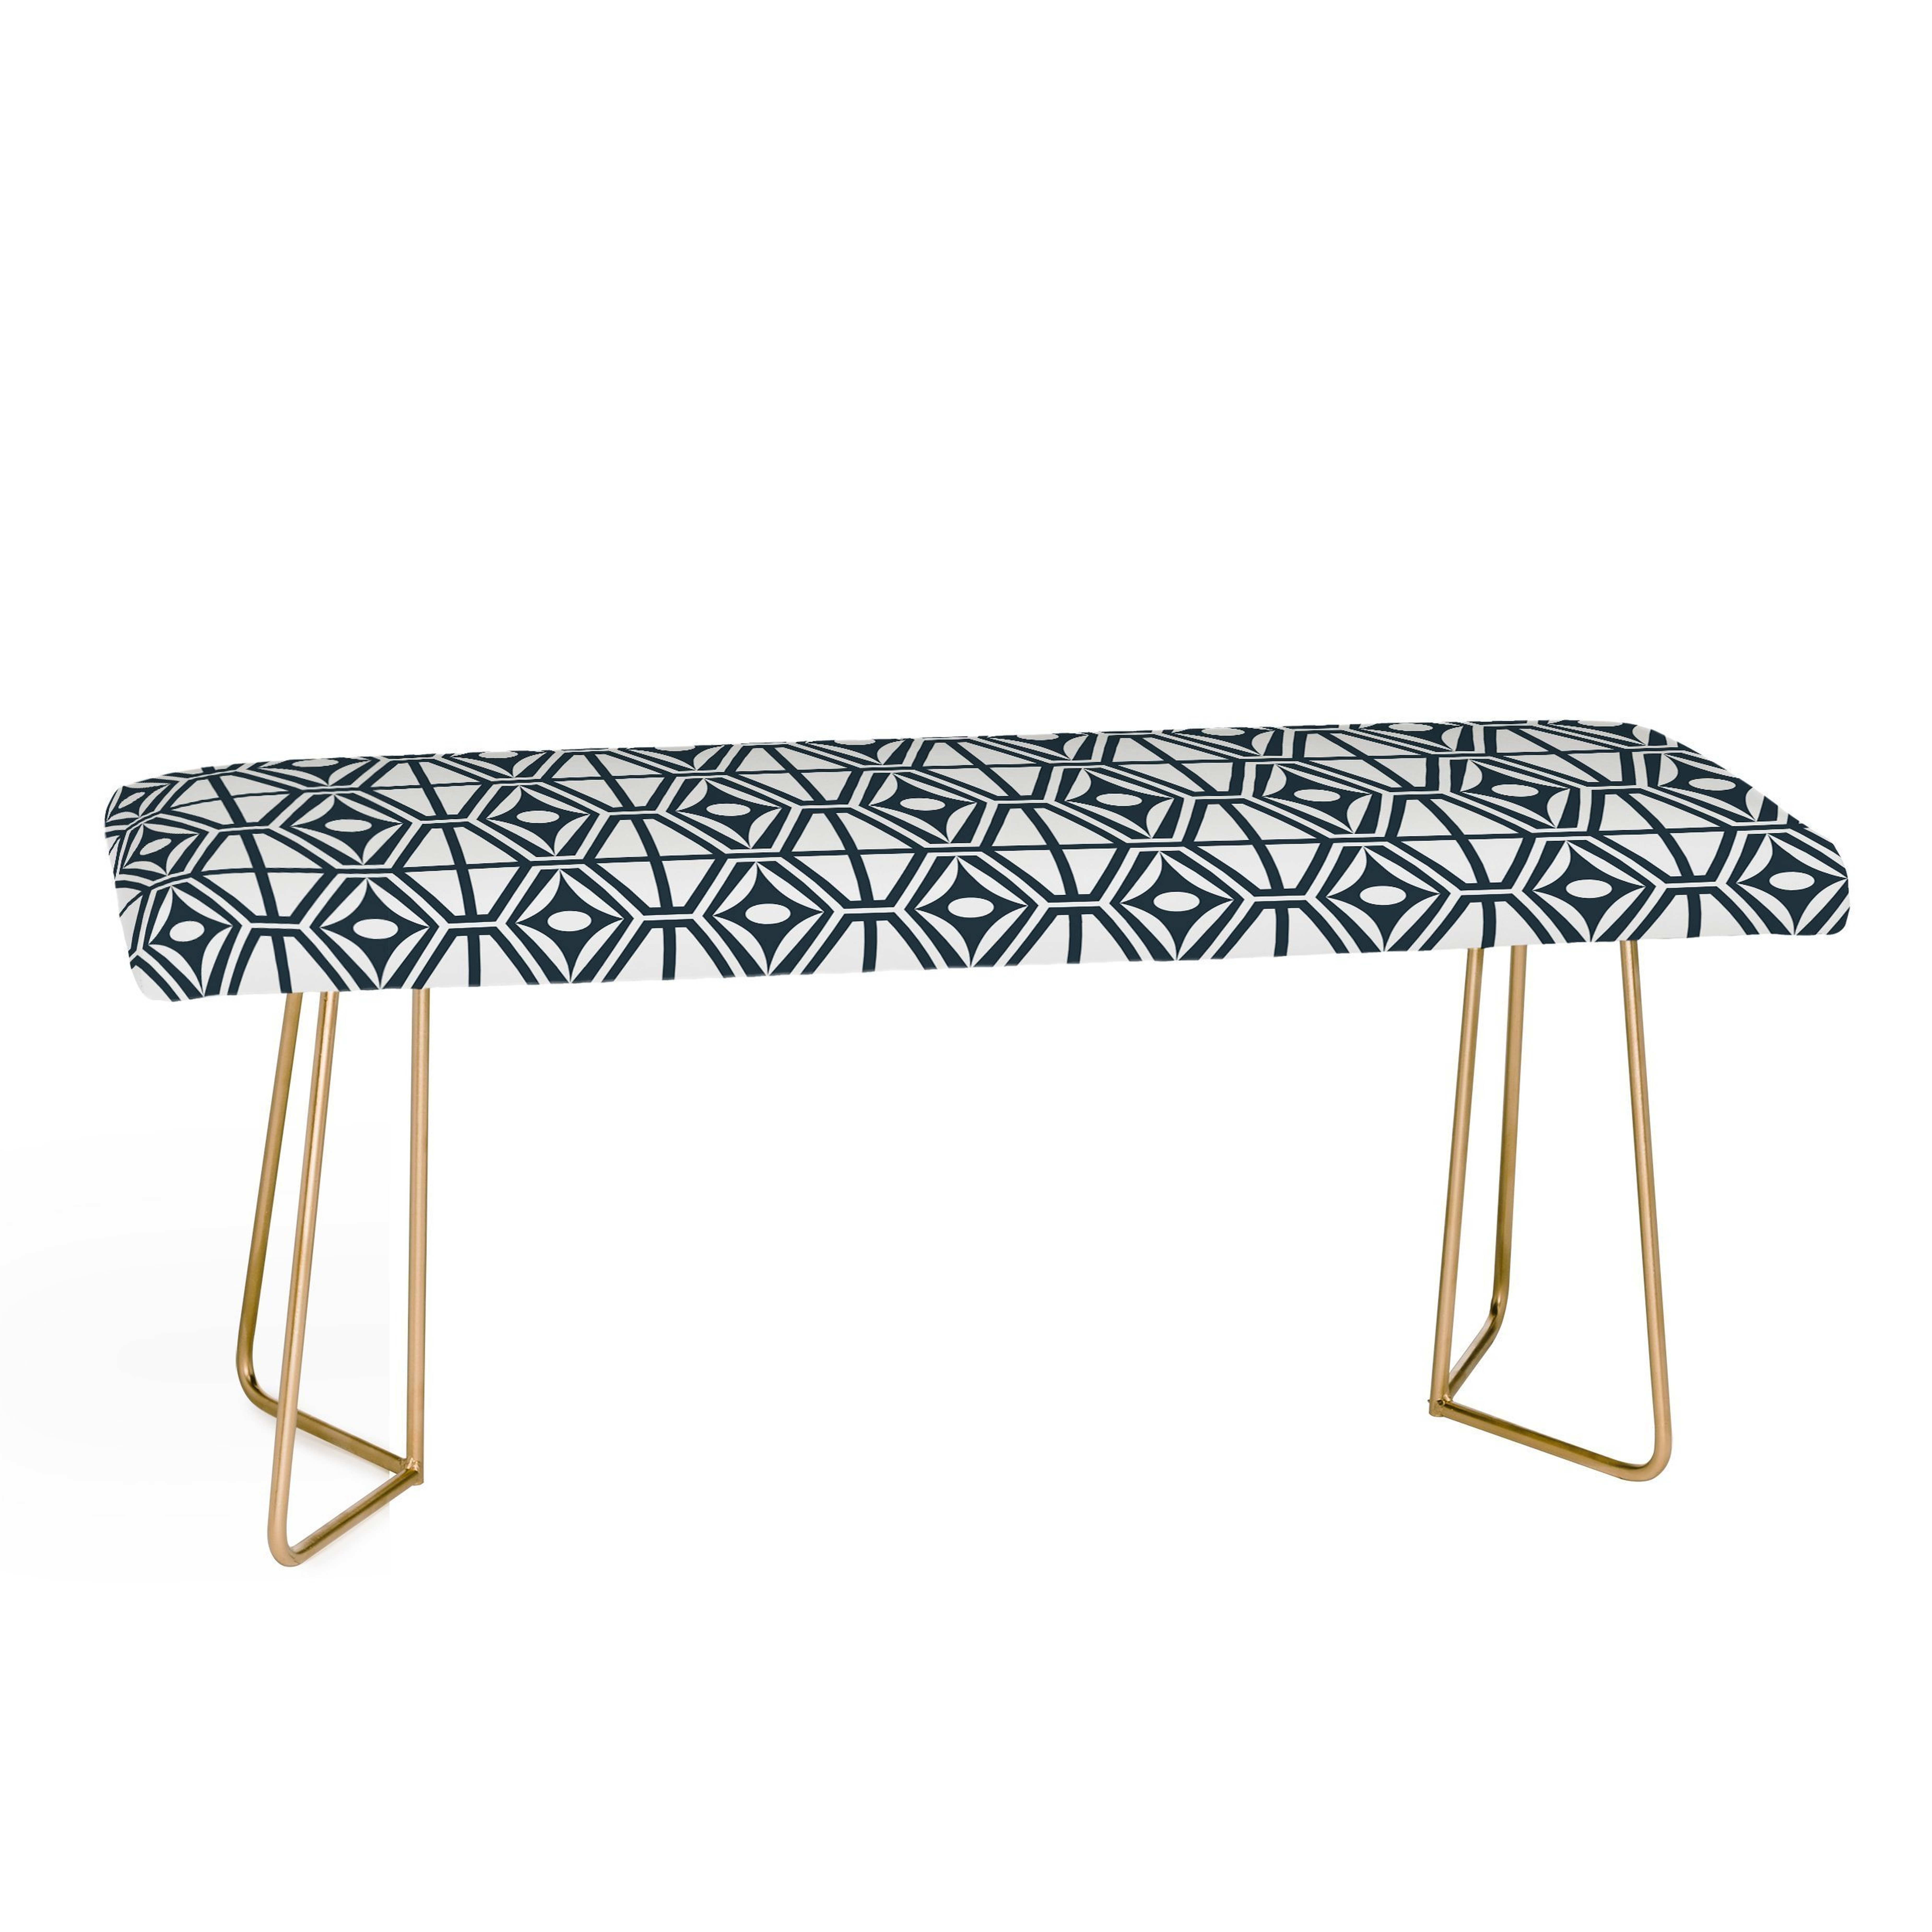 METRO STEEL Bench by Heather Dutton - Gold - Wander Print Co.